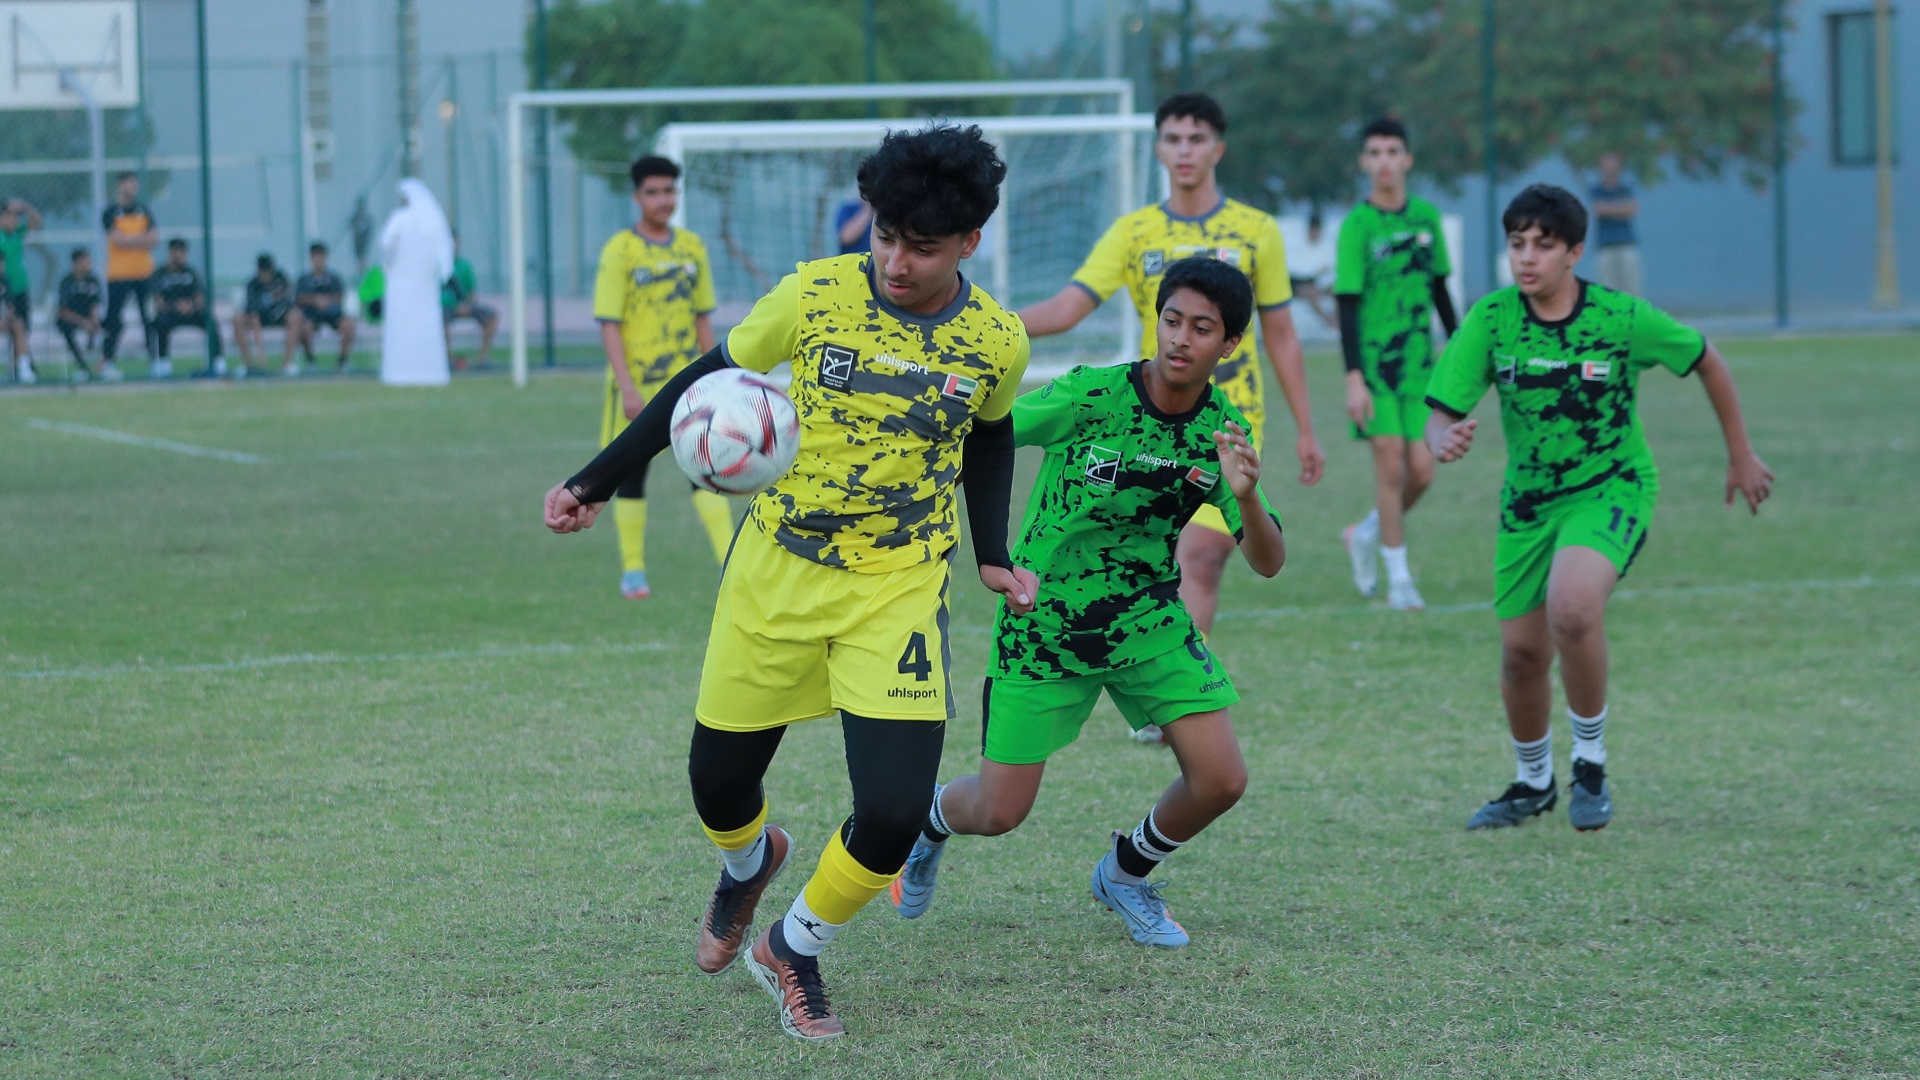 Sharjah mini to Youth football conclude championship